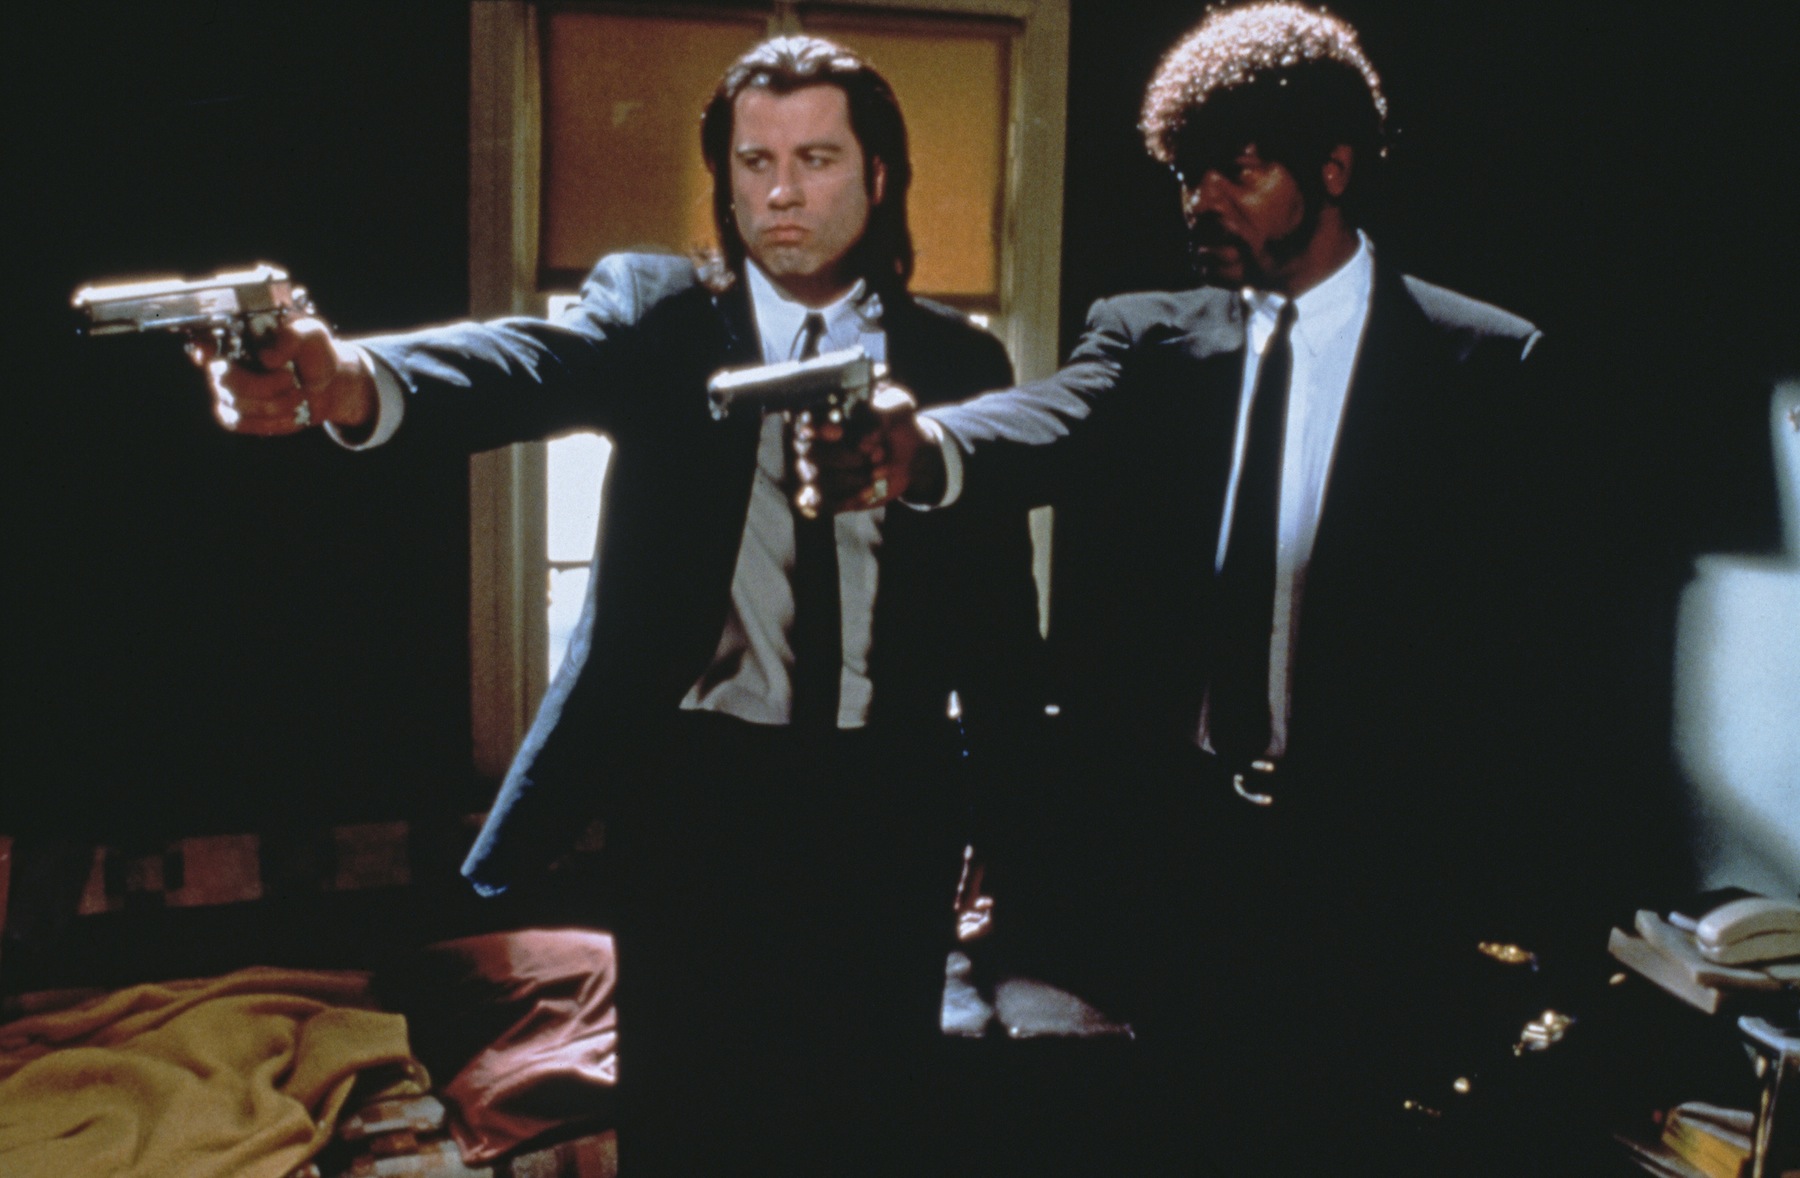 Pulp Fiction 20th Anniversary: A Critic Reflects | Time